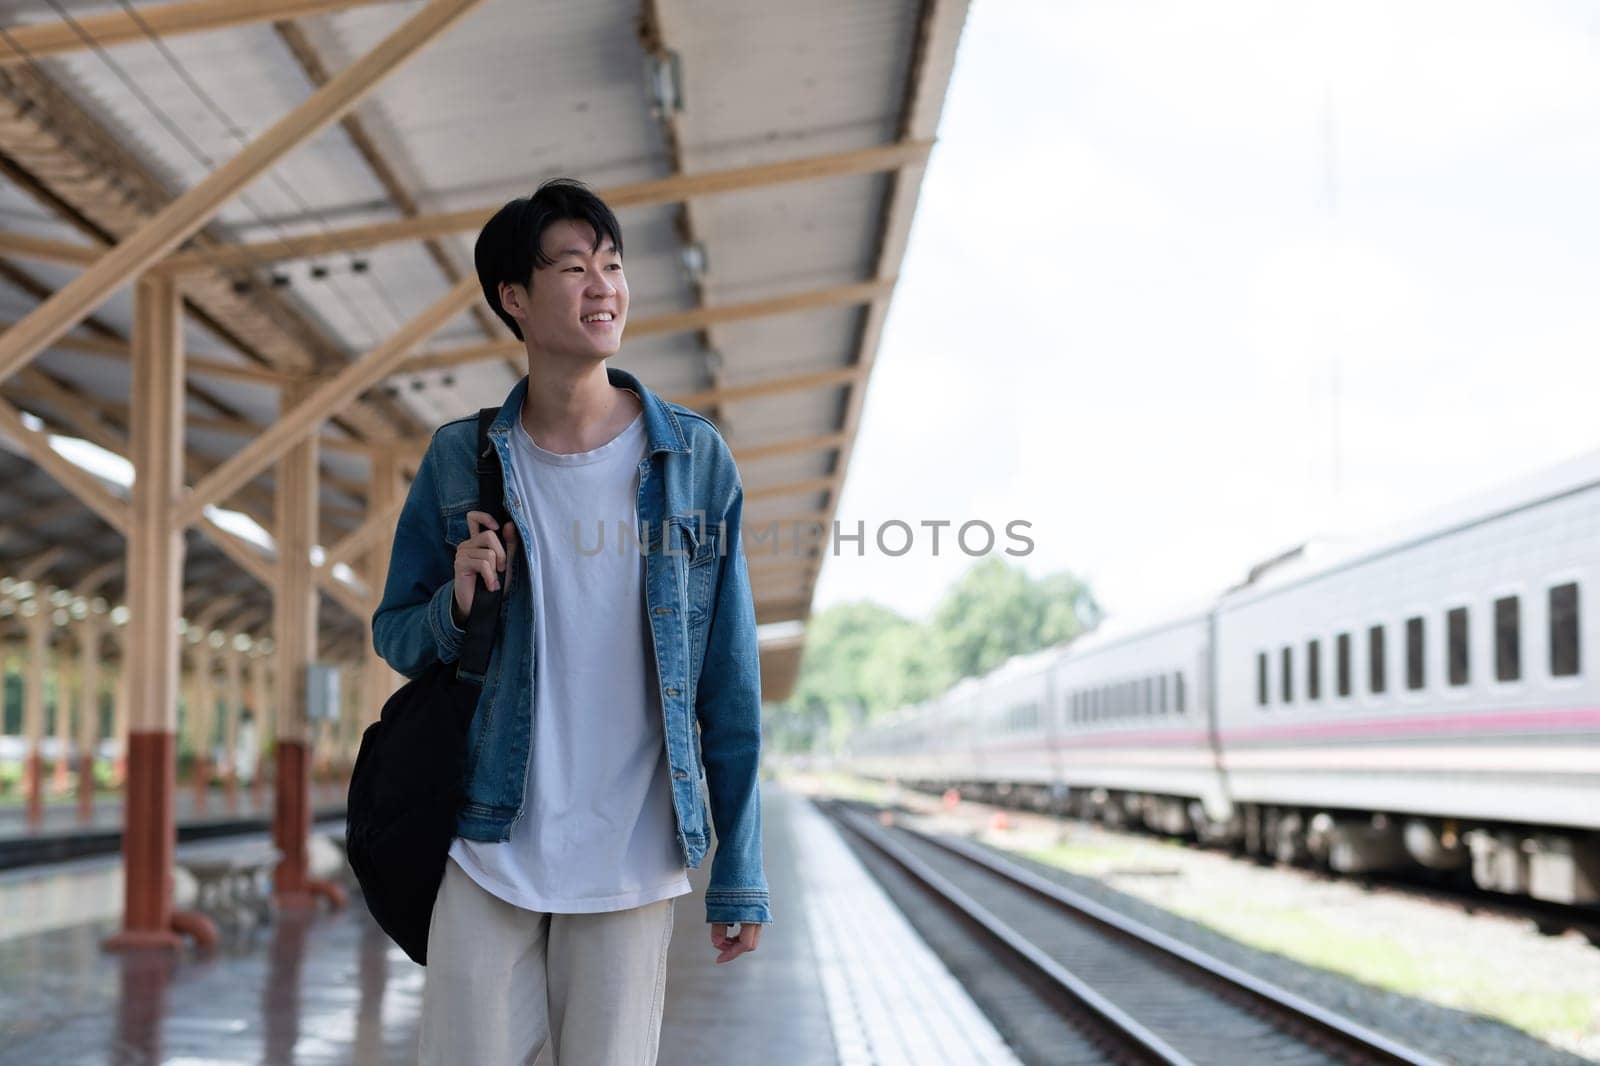 A young man carries a backpack and waits for the train at the train station to travel..